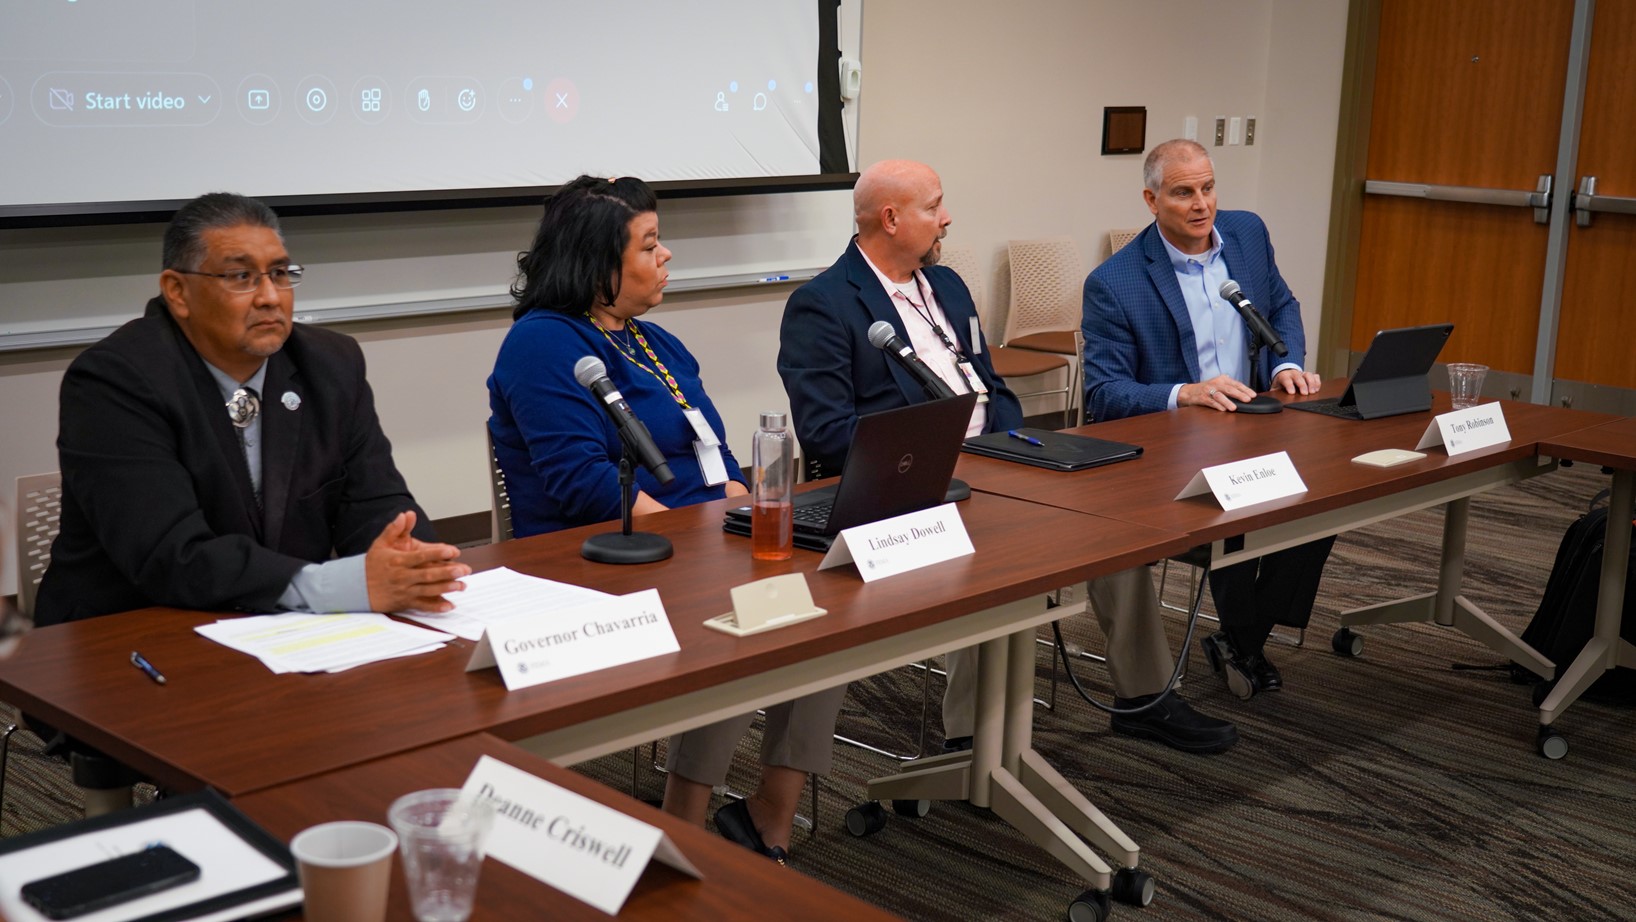 The National Advisory Council panel discussions addressed emergency management issues when working directly with Tribal Nations. Here, FEMA Region 6 Administrator Tony Robinson (far right) sits with Santa Clara Pueblo Gov. J. Michael Chavarria (far left); Choctaw Nation of Oklahoma Staff Attorney Lindsay Dowell (2nd from left); and Pittsburg County Emergency Management Director Kevin Enloe. 